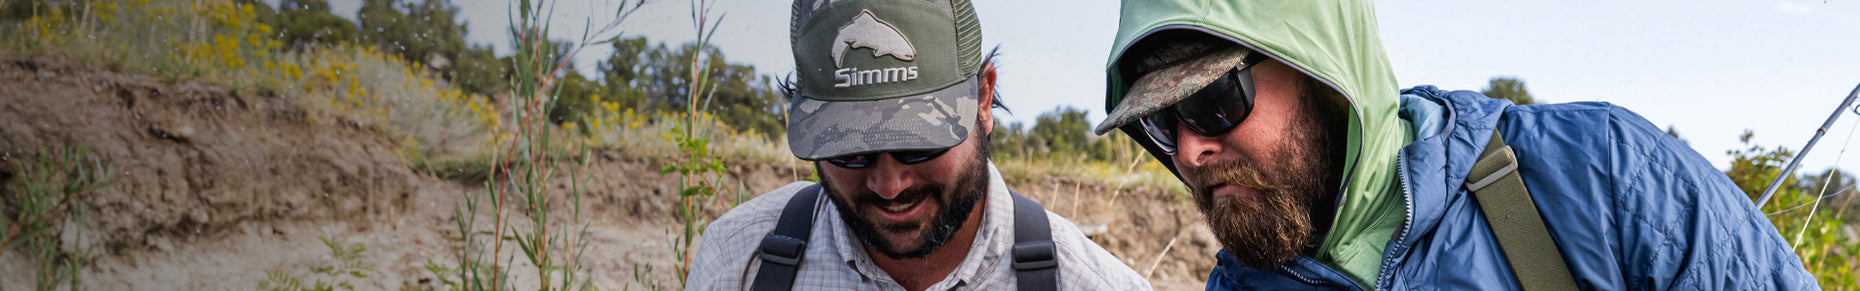 Spot on Fishing Tackle - The Fishing Connection - News hats just arrived  from our good friends Simms Fishing Products including the awesome new  river camo!!